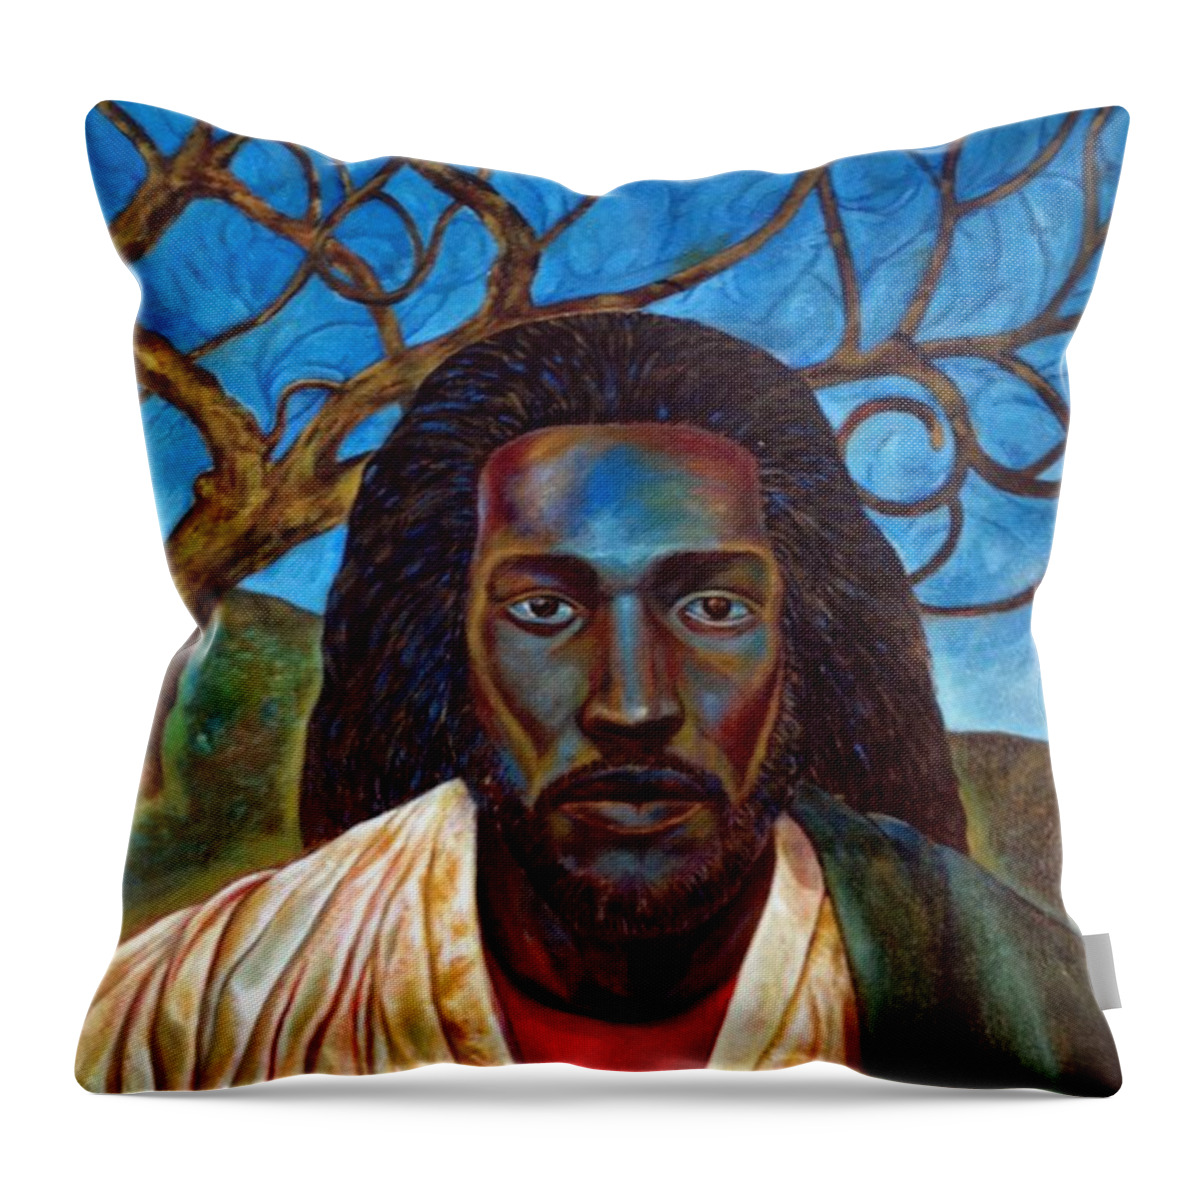 Holy Throw Pillow featuring the painting Holy Man by Joe Roache